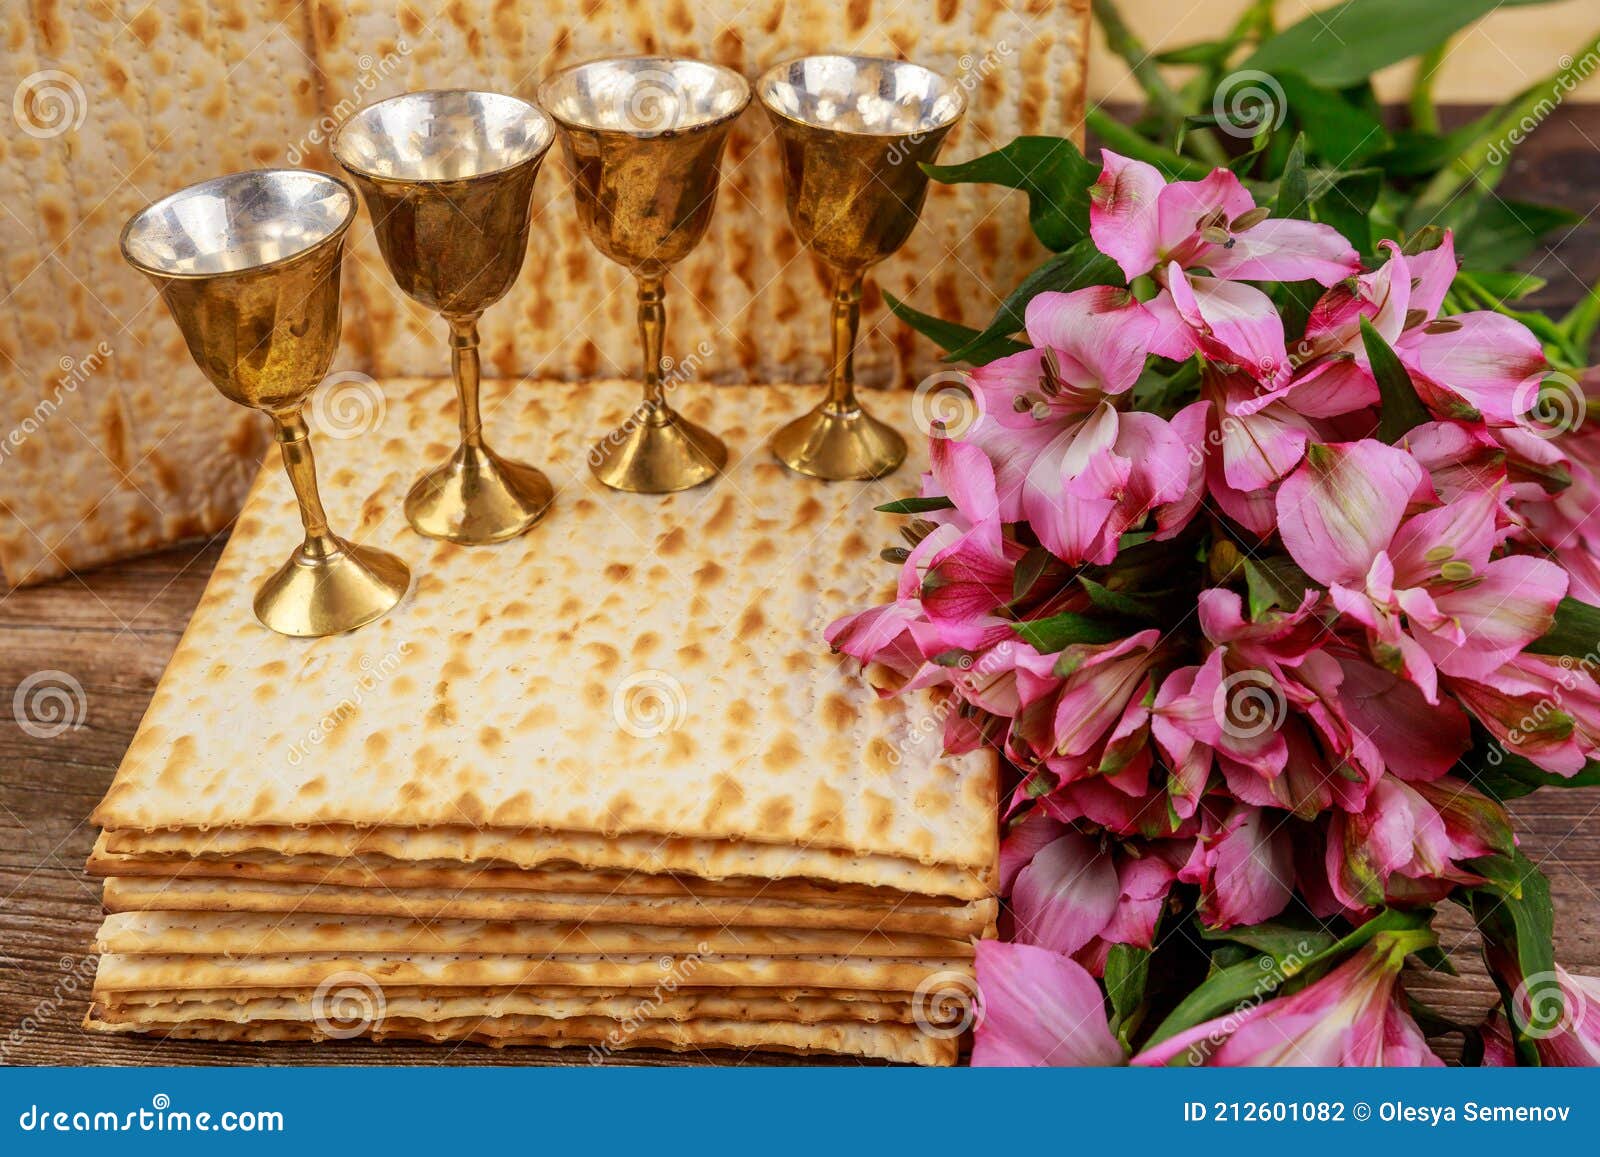 four-cups-full-of-wine-with-matzah-jewish-holidays-passover-stock-photo-image-of-haggadah